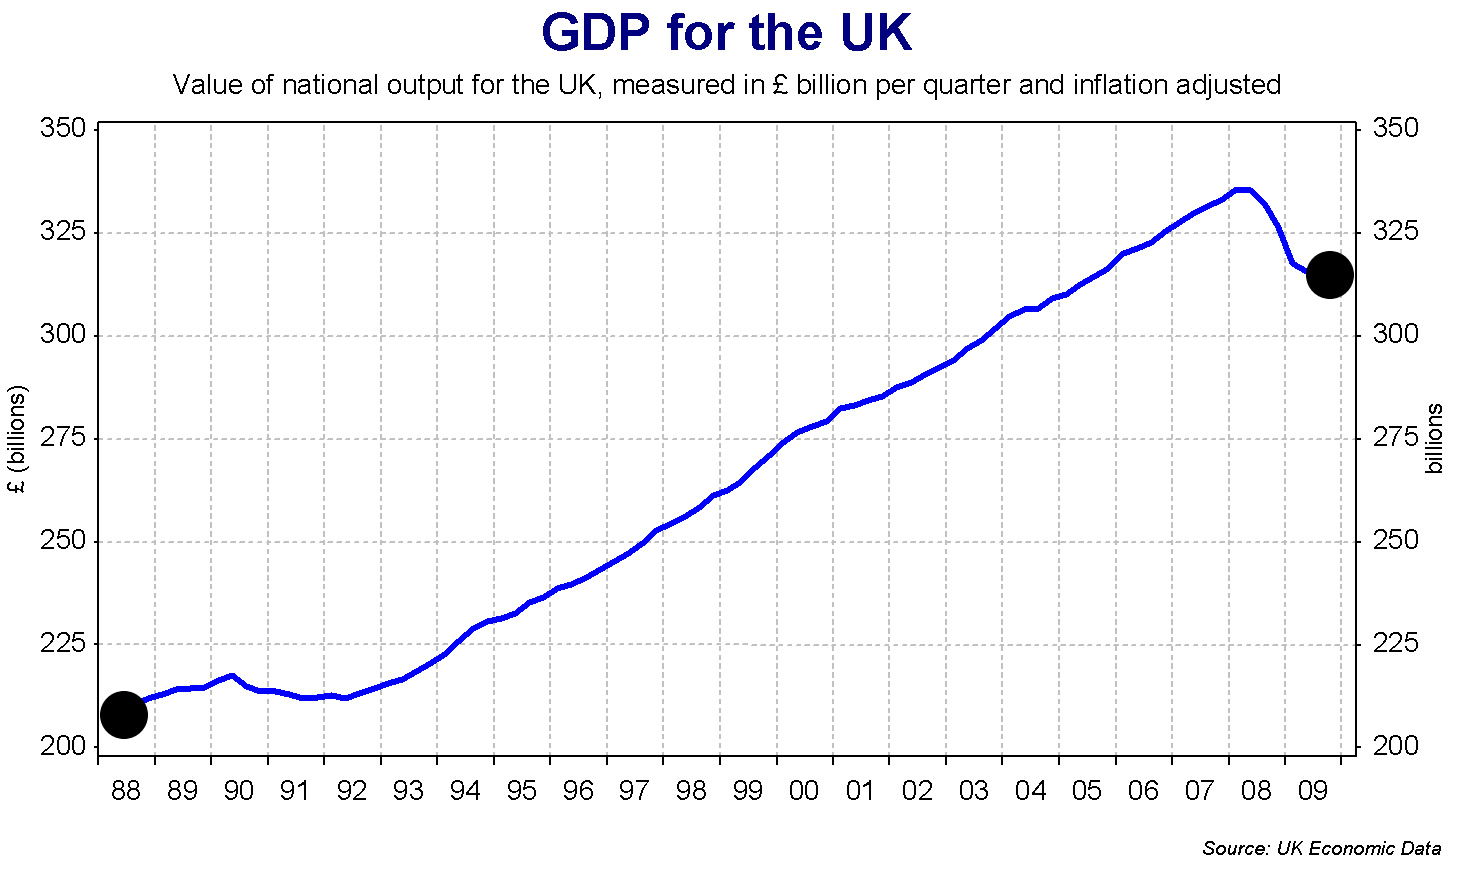 GDP for the United Kingdom in the recent years.